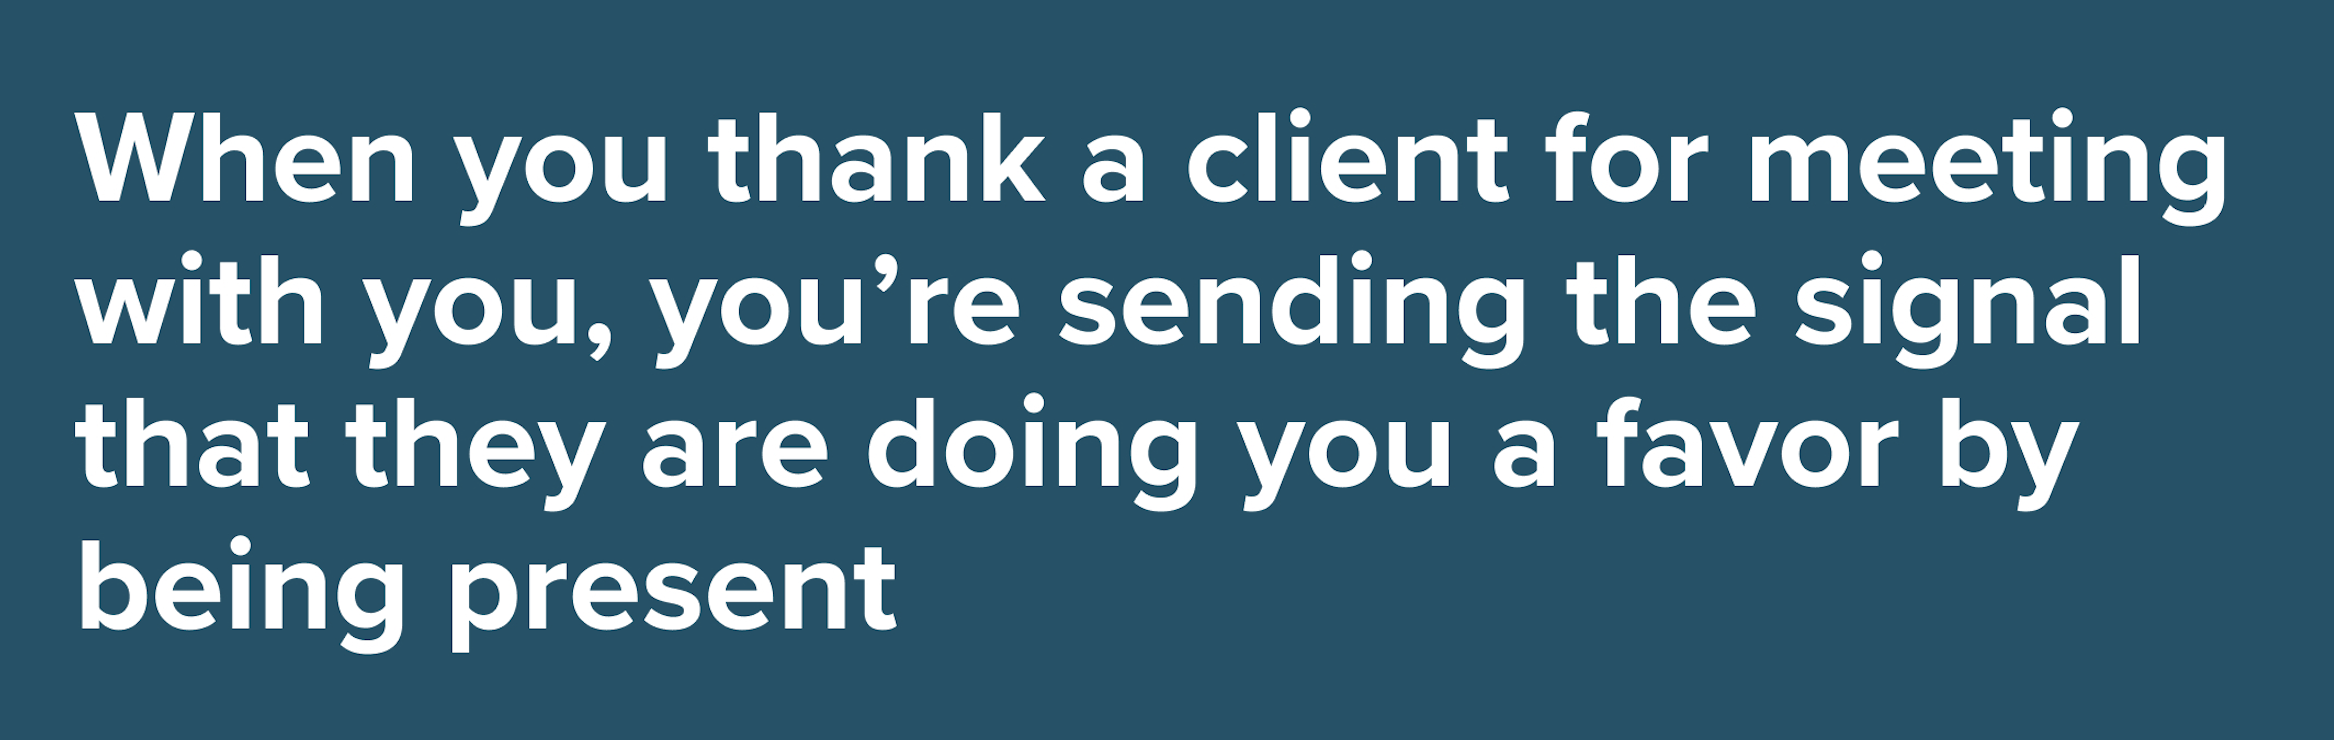 When-you-say-thank-you-to-a-client